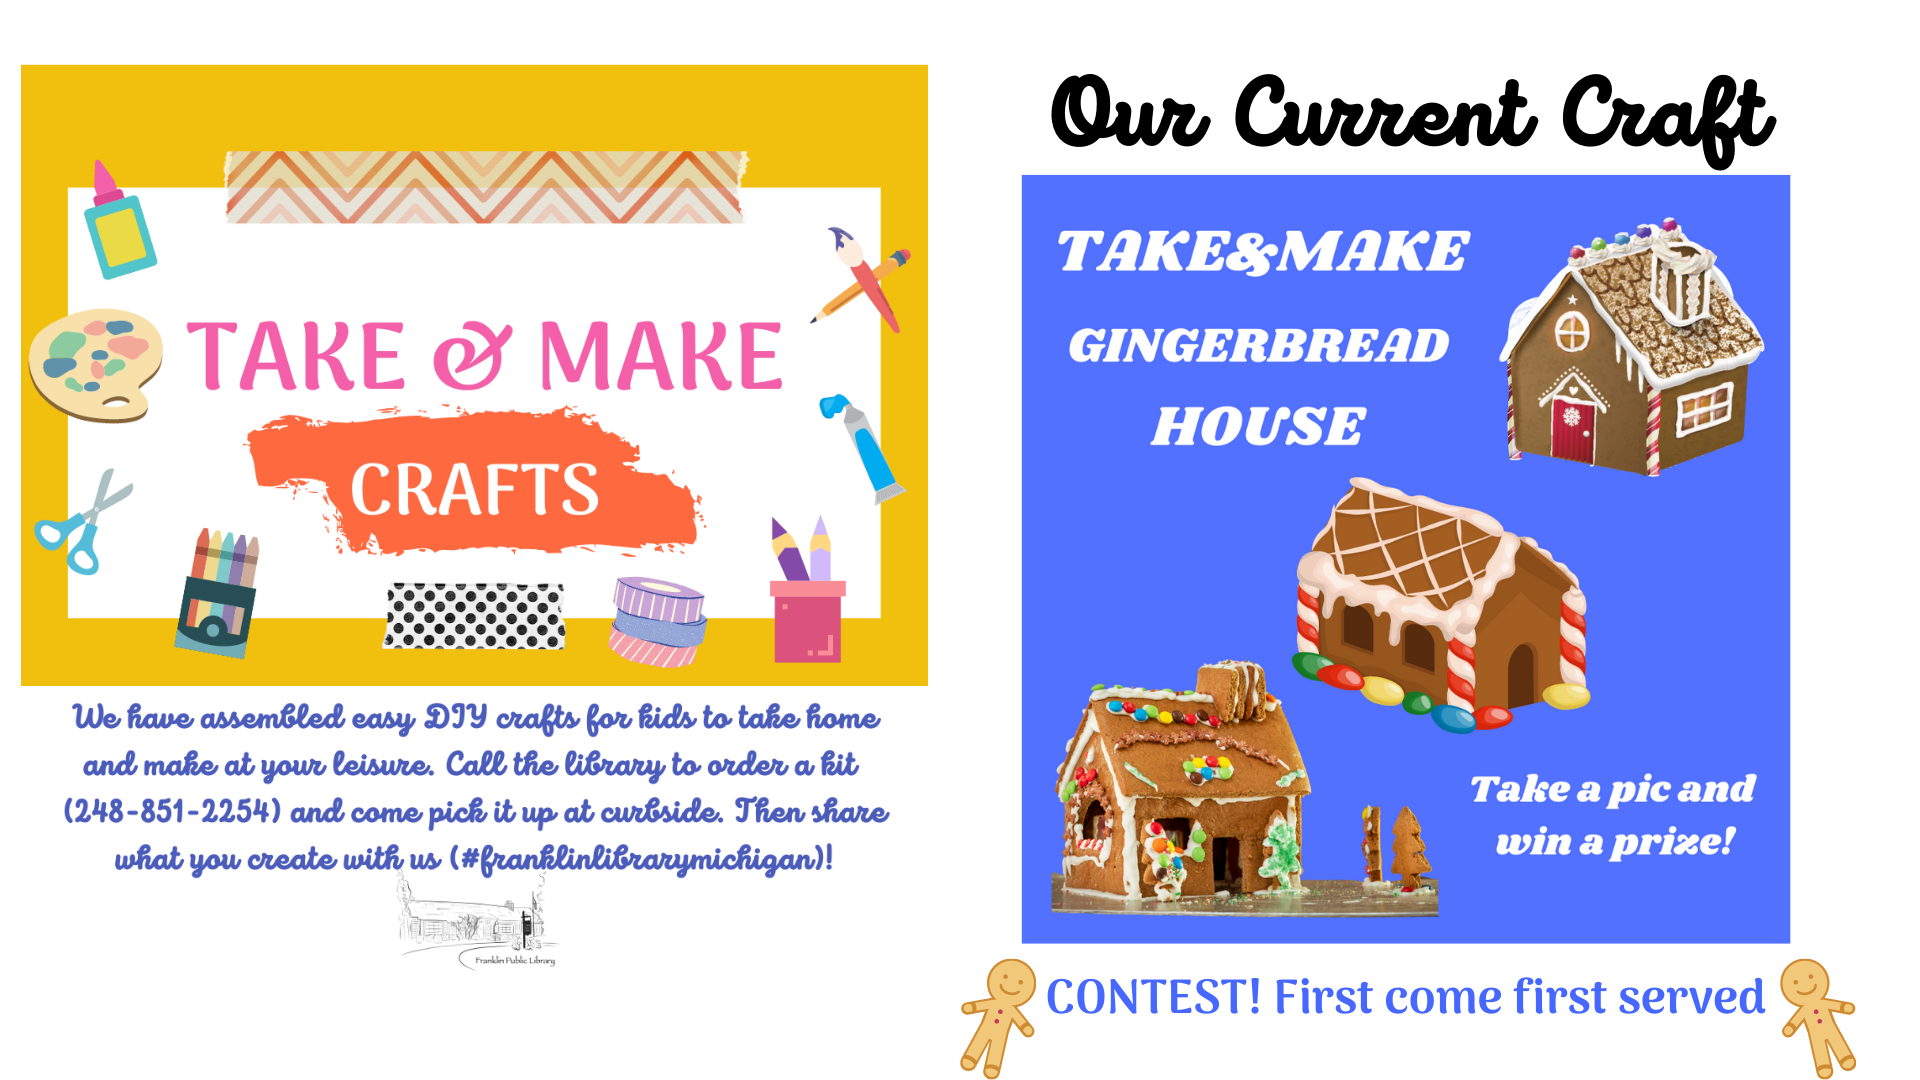 CAROUSEL Current craft Gingerbread.png